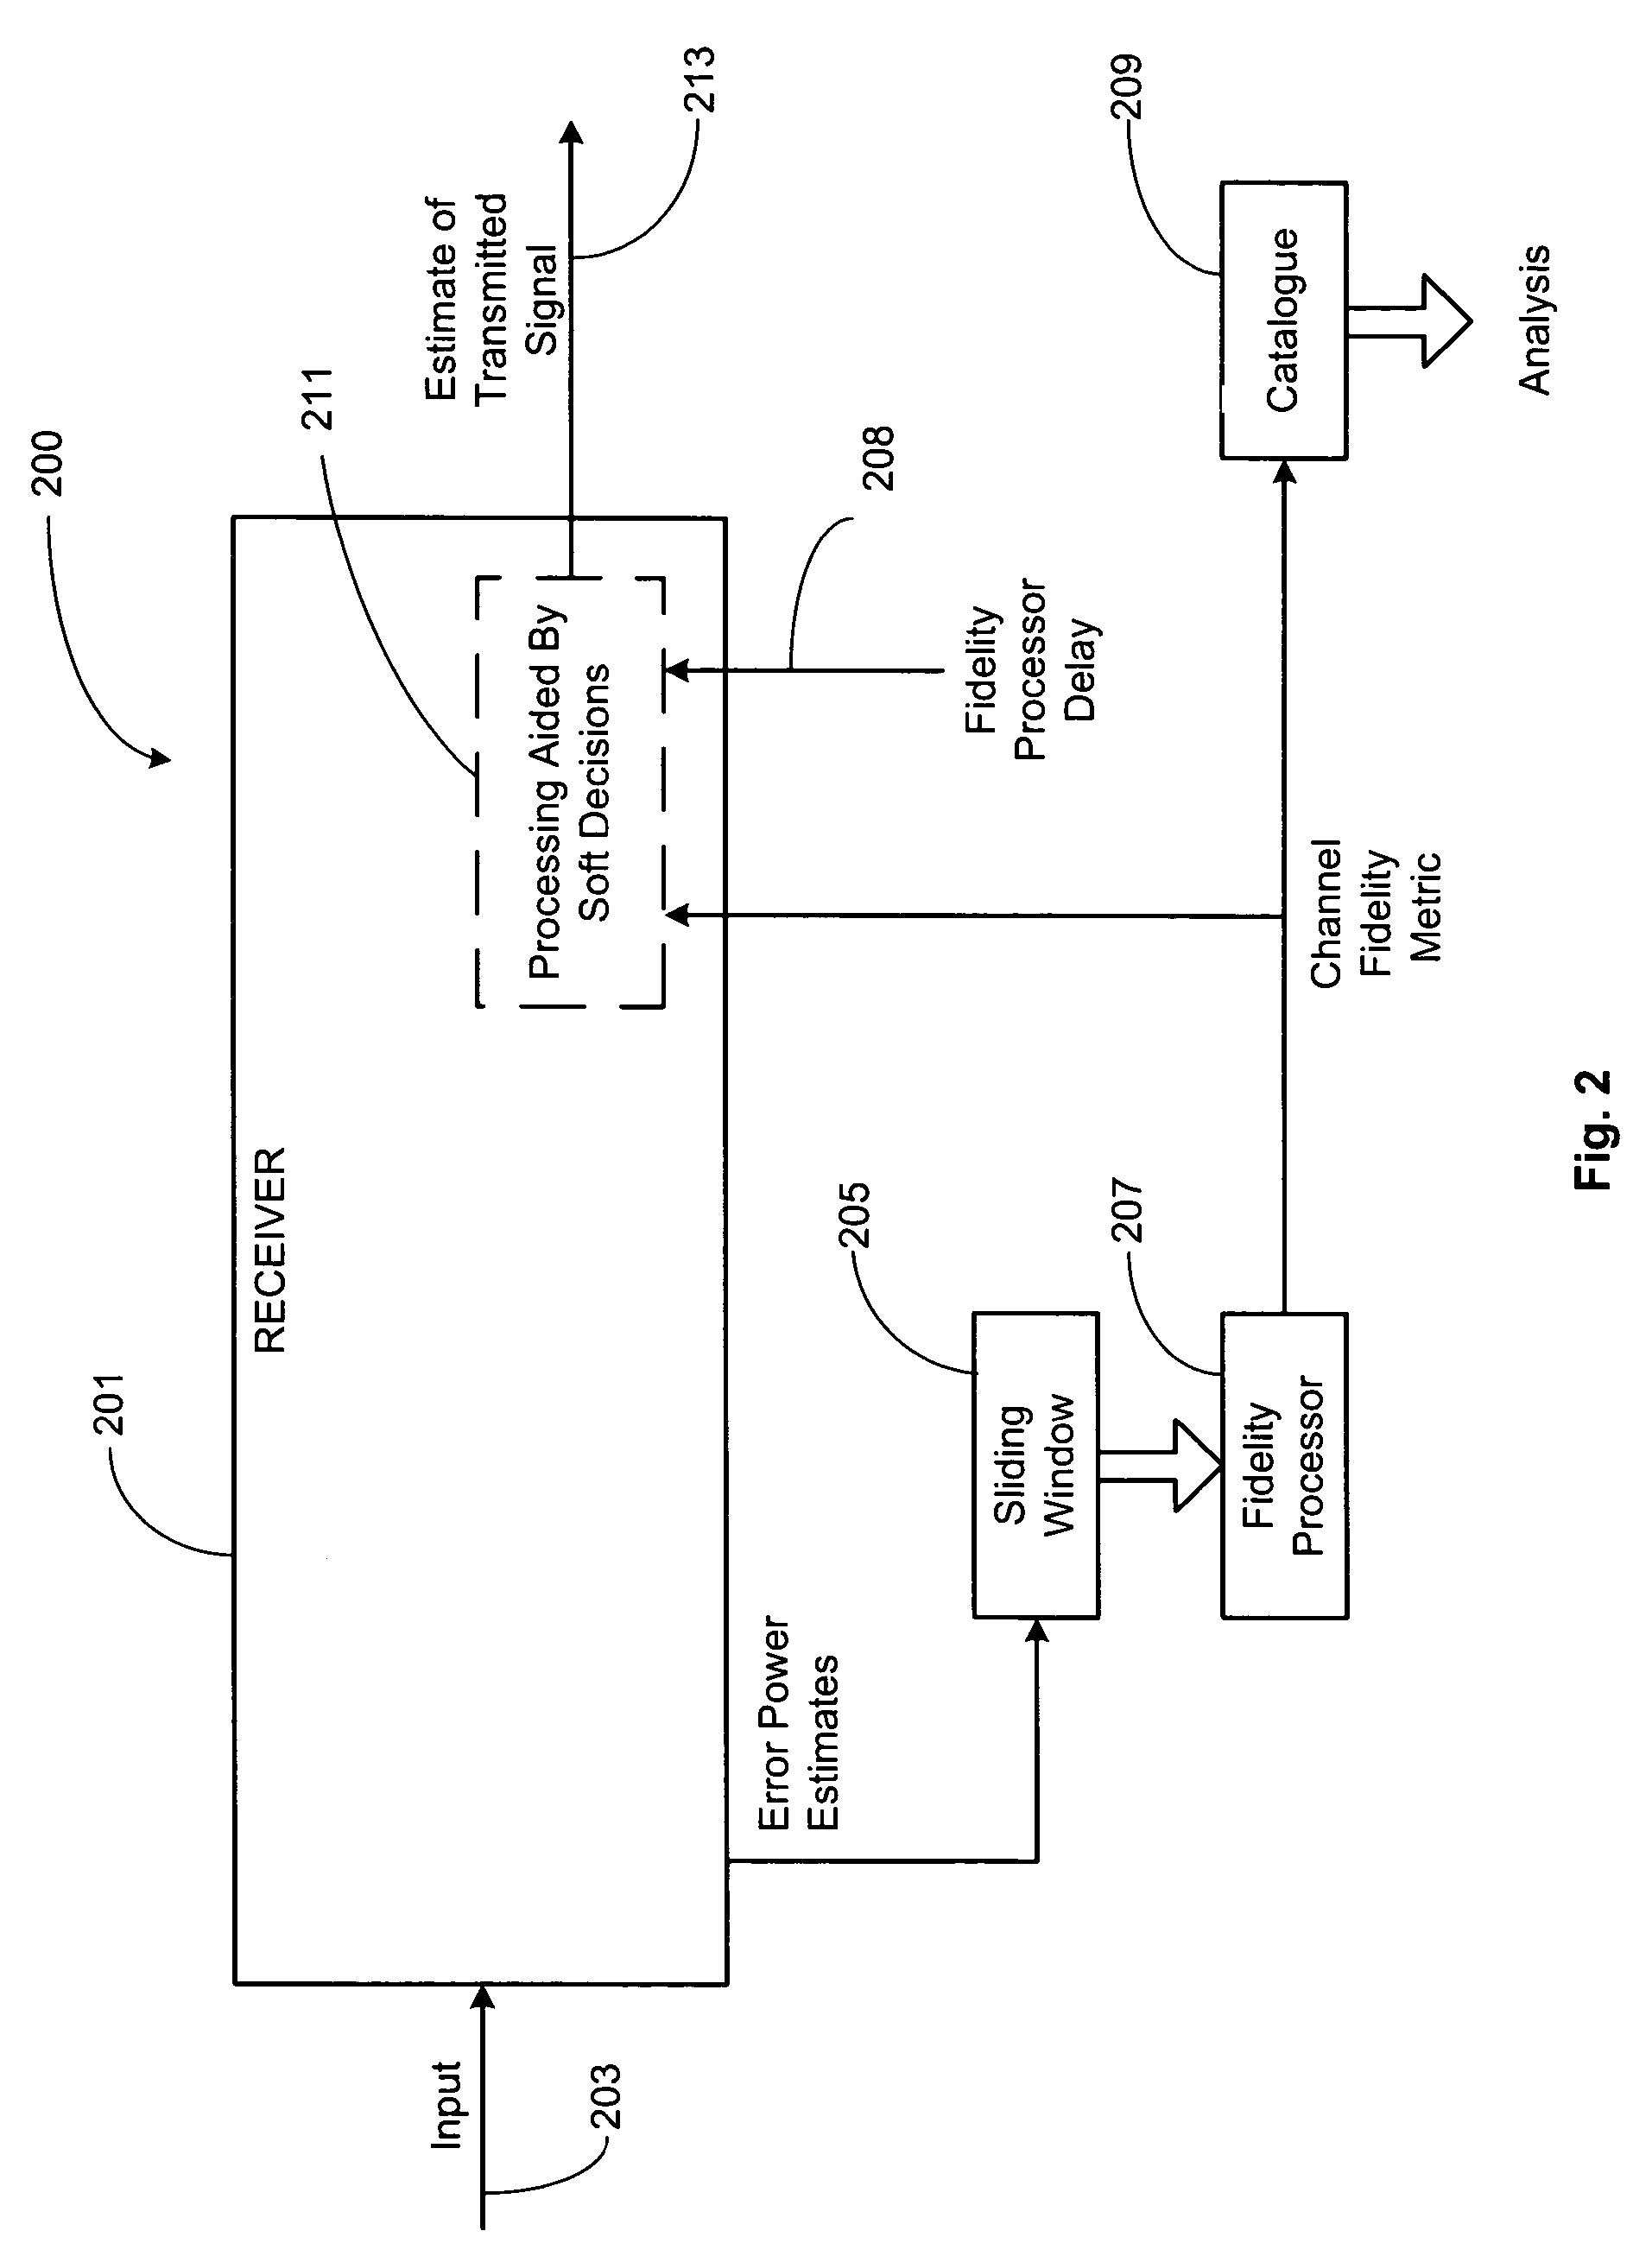 Chip blanking and processing in SCDMA to mitigate impulse and burst noise and/or distortion